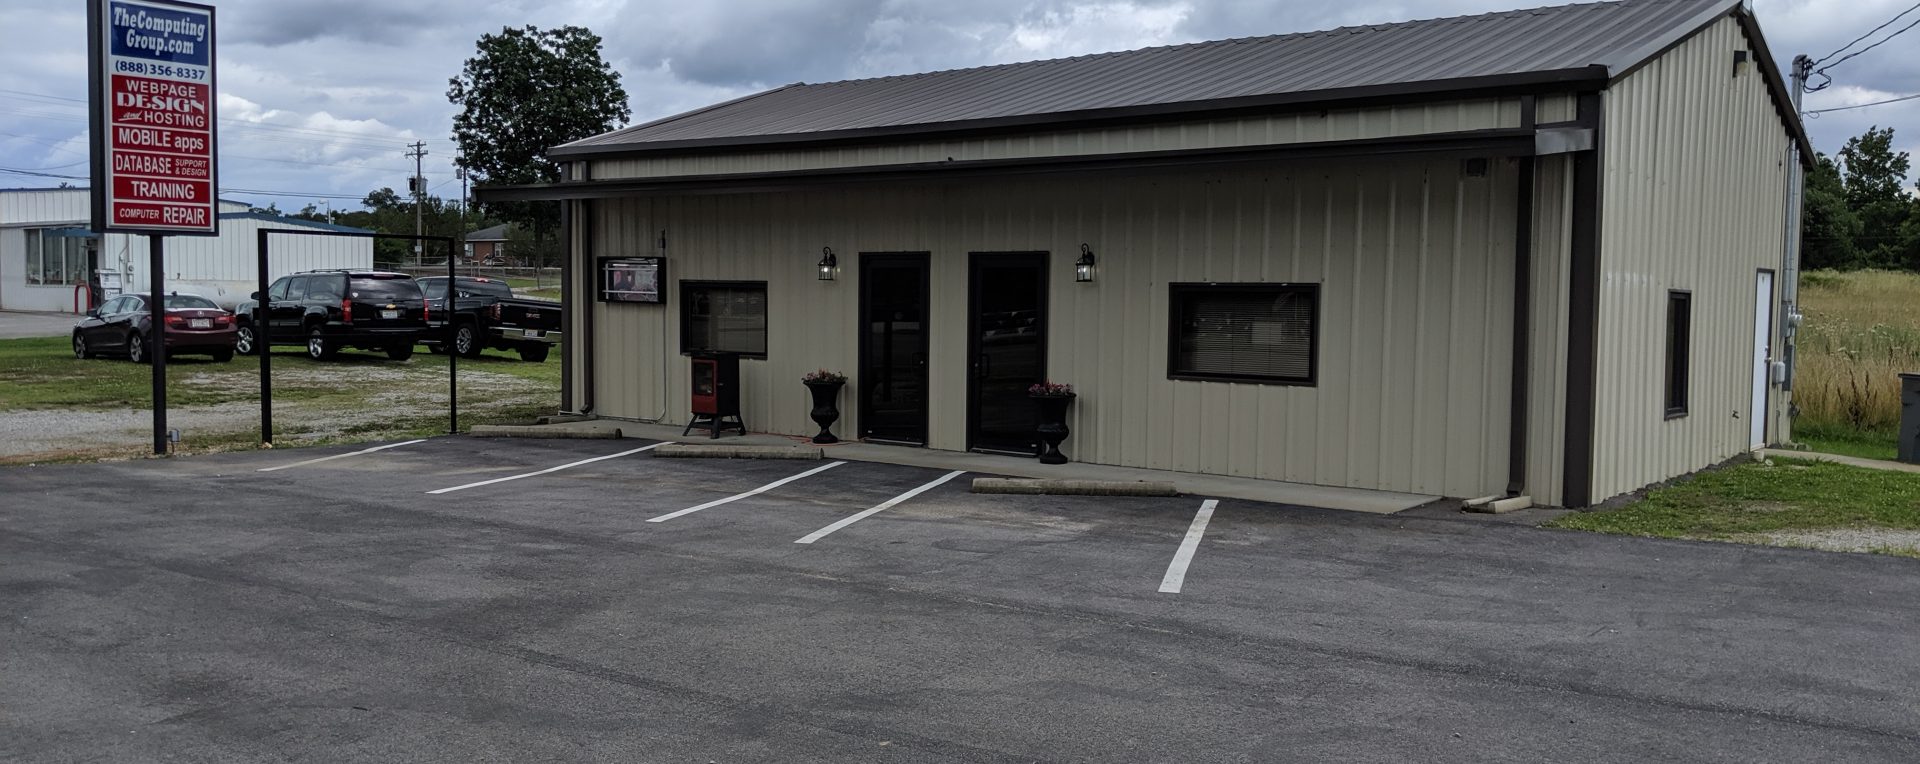 Our office is located at 3672 Cloverdale Rd.  Florence, Al 35633